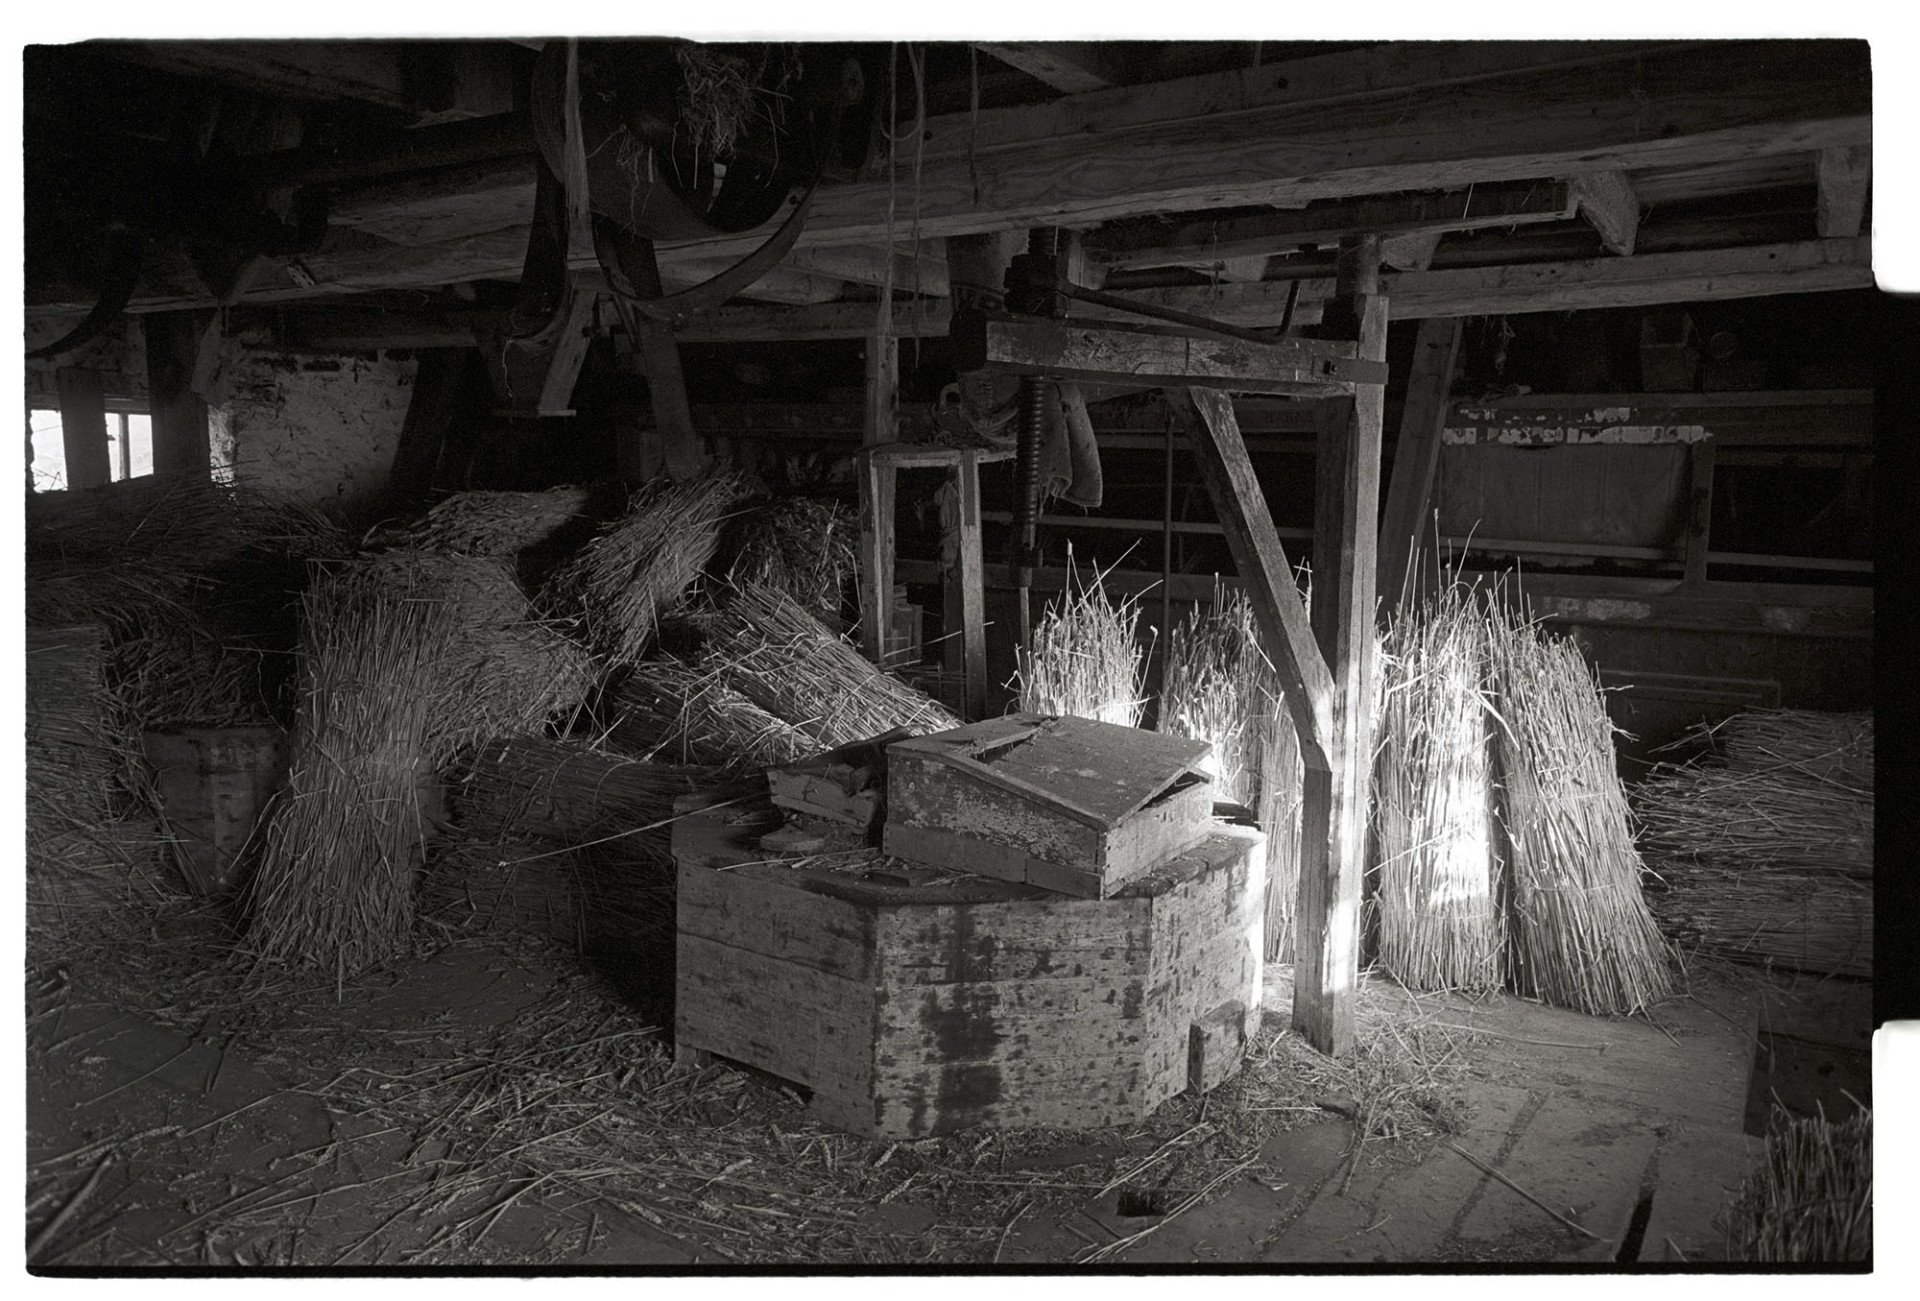 Views inside mill showing grindstone cover, machinery and stored nitches of wheat. 
[The interior of Rashleigh Mill at Ashreigney. Various machinery is visible, including a grindstone with a wooden cover. Nitches of wheat waiting to be milled is stacked around the mill.]